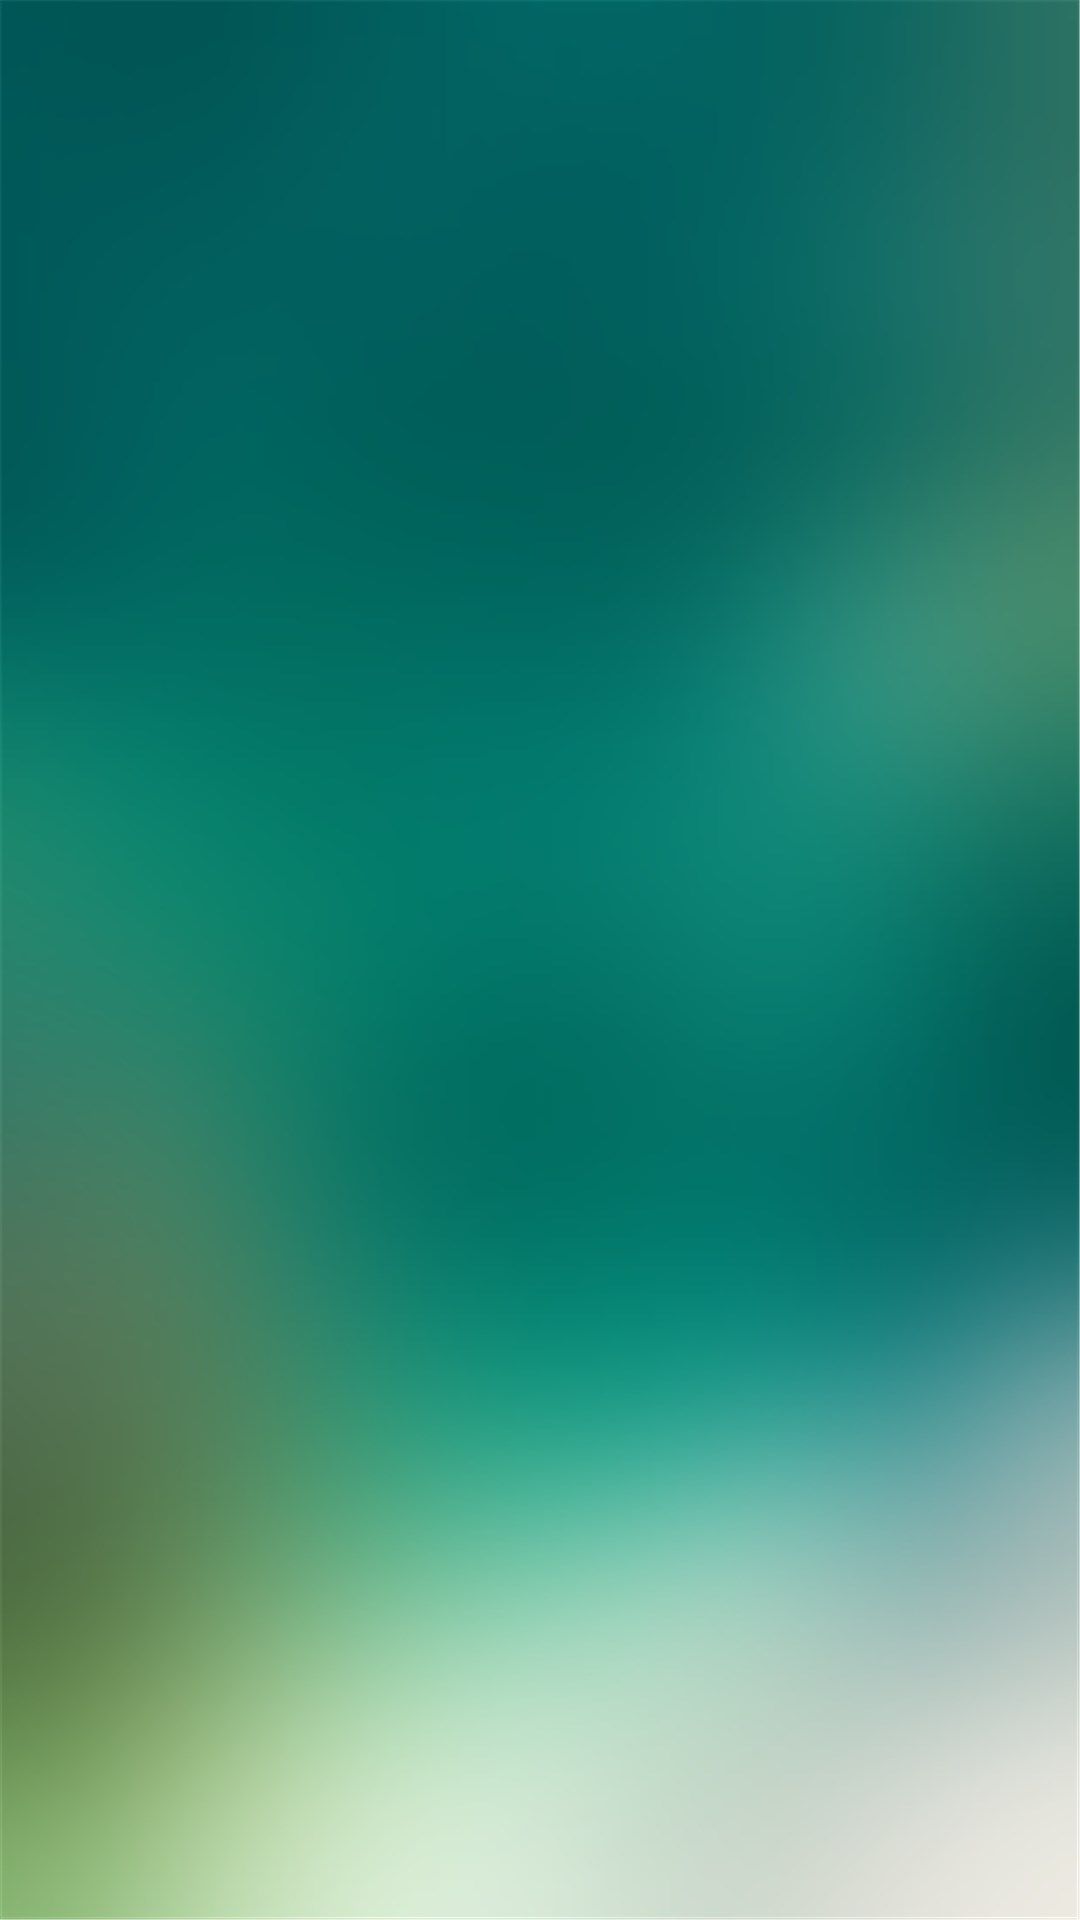 Abstract Neon Light Colors Gradation Blur iPhone 8 Wallpaper Free